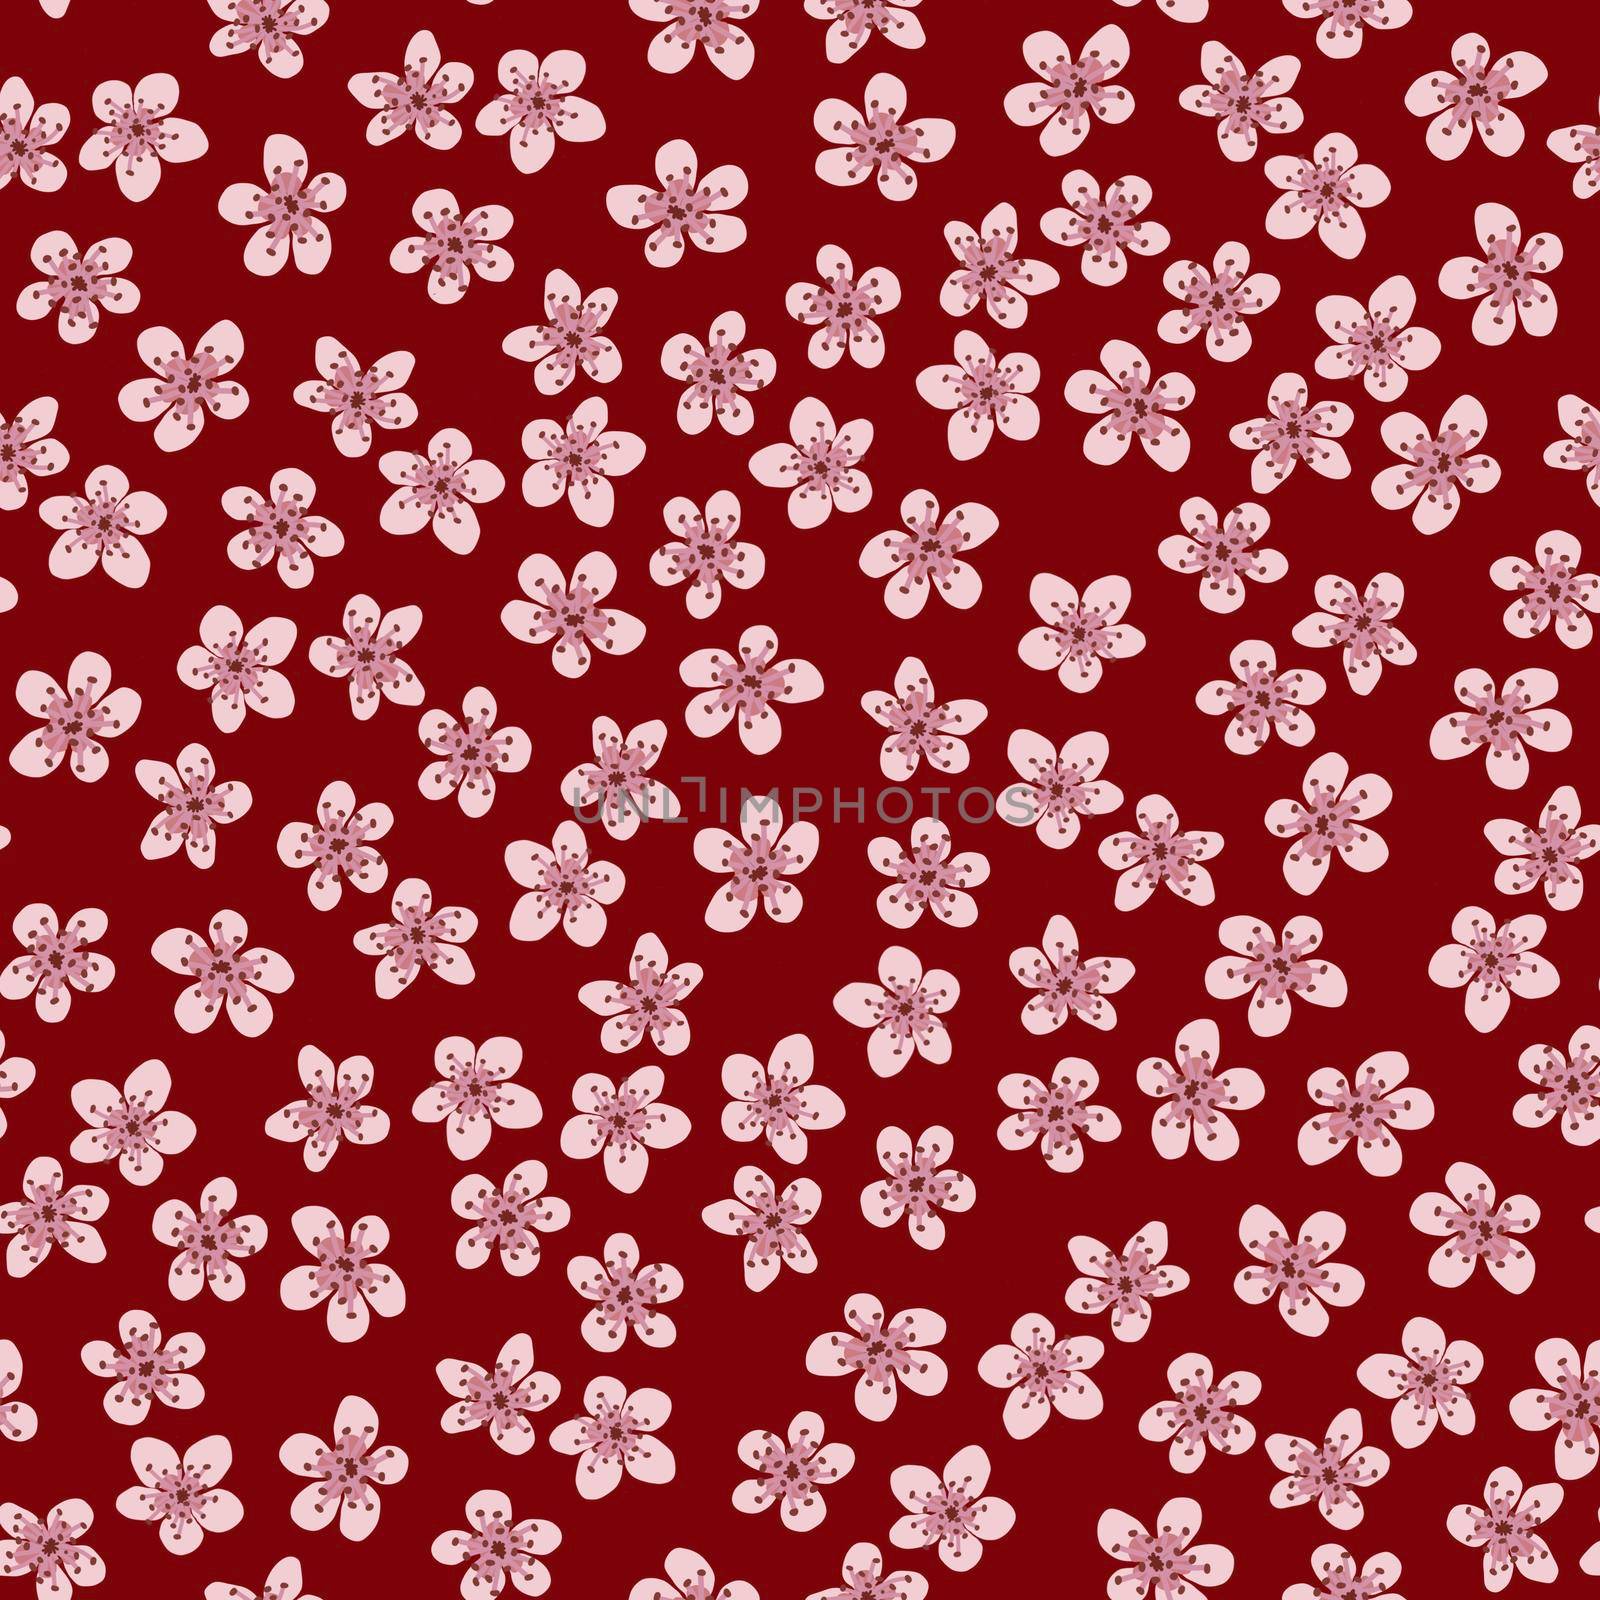 Seamless pattern with blossoming Japanese cherry sakura for fabric, packaging, wallpaper, textile decor, design, invitations, print, gift wrap, manufacturing. Pink flowers on ruby background